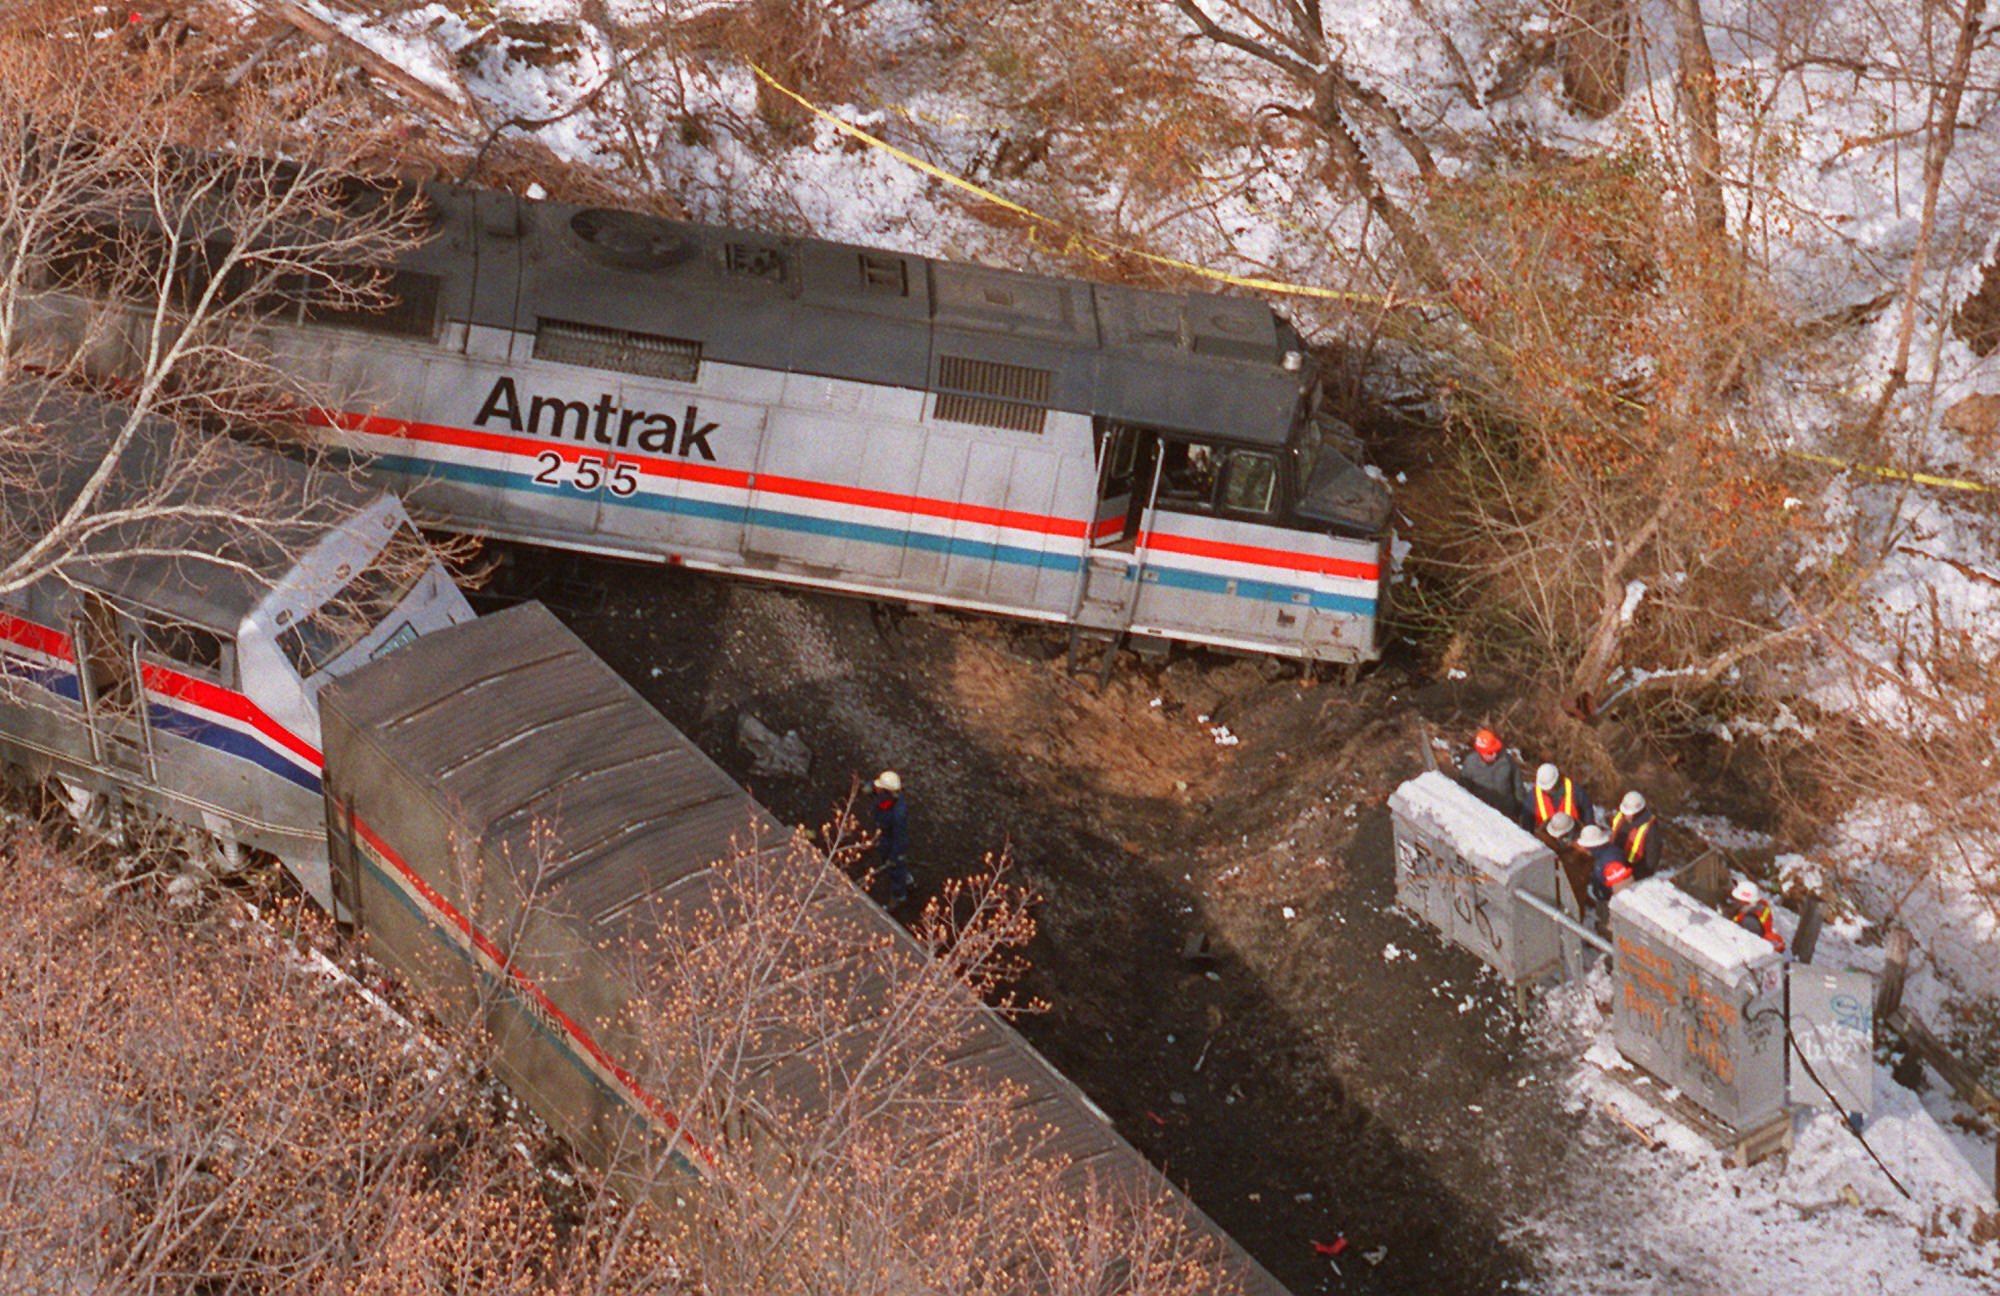 Retired Md. firefighters remember fatal Amtrak crash in Silver Spring, 20 years ago